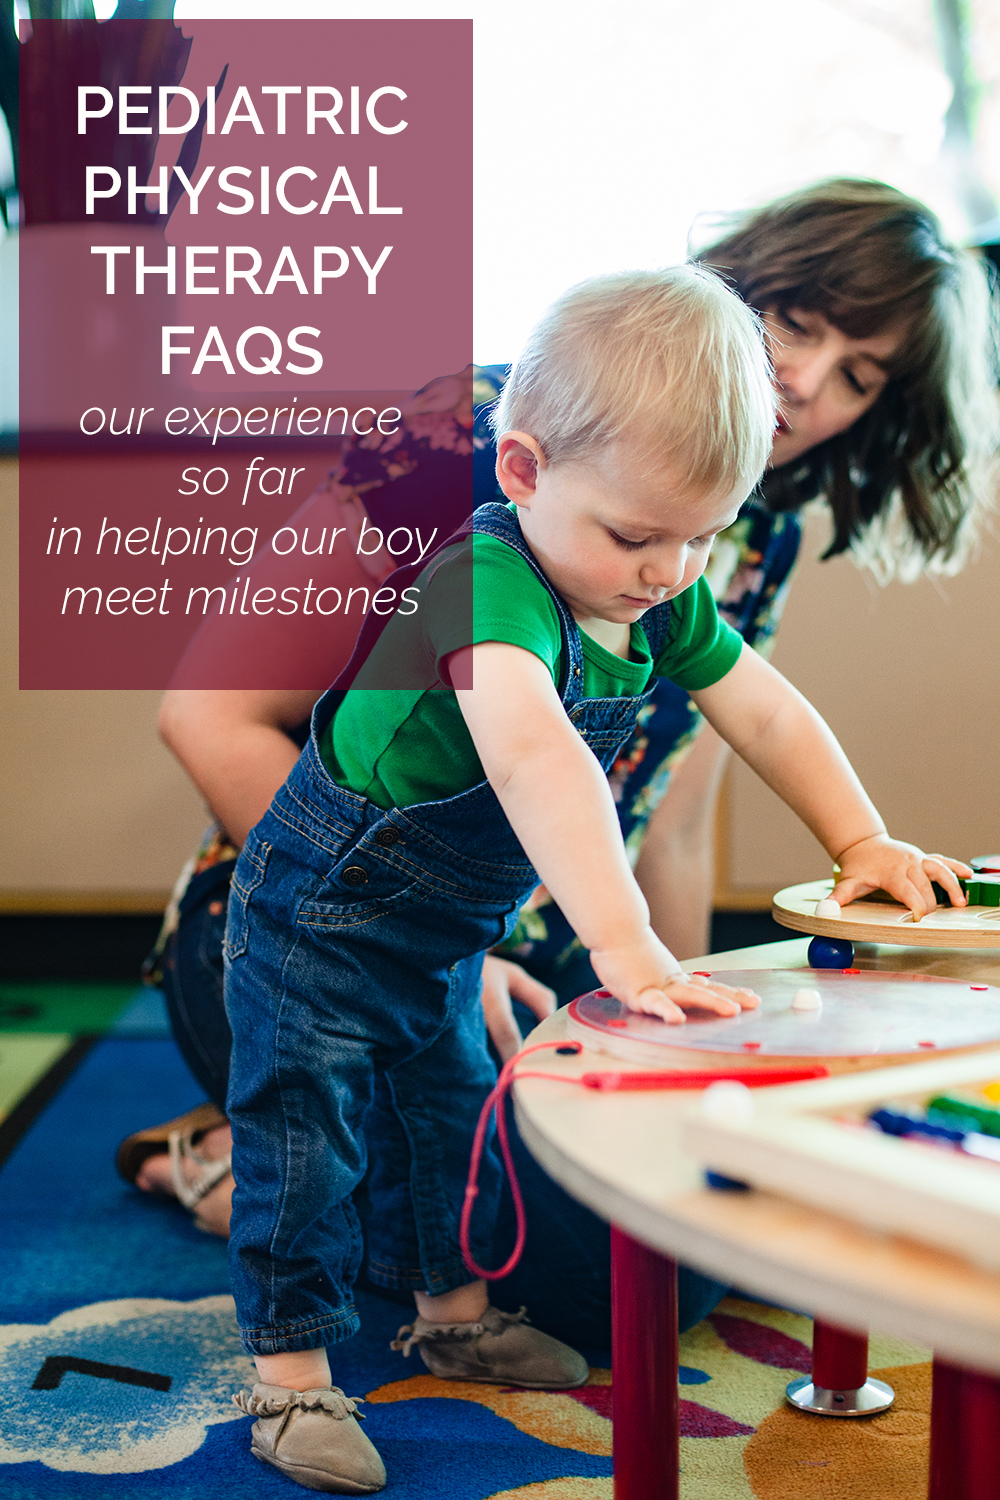 Pediatric Physical Therapy, Part 1: FAQs